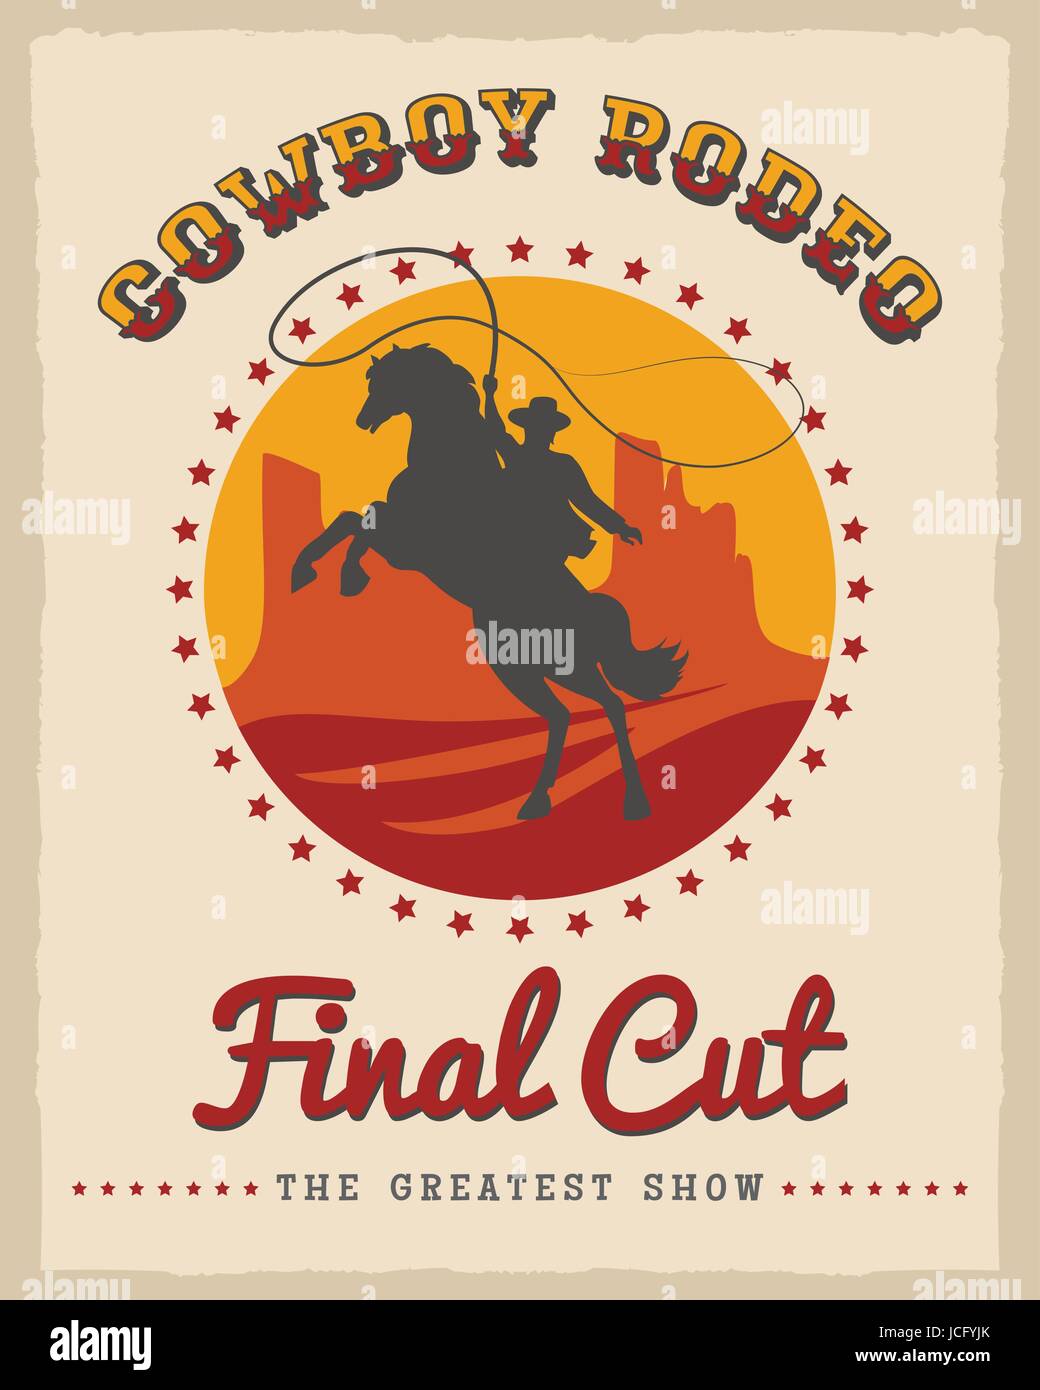 Cowboy rodeo poster vector illustration. American country style texas western vintage placard design template Stock Vector